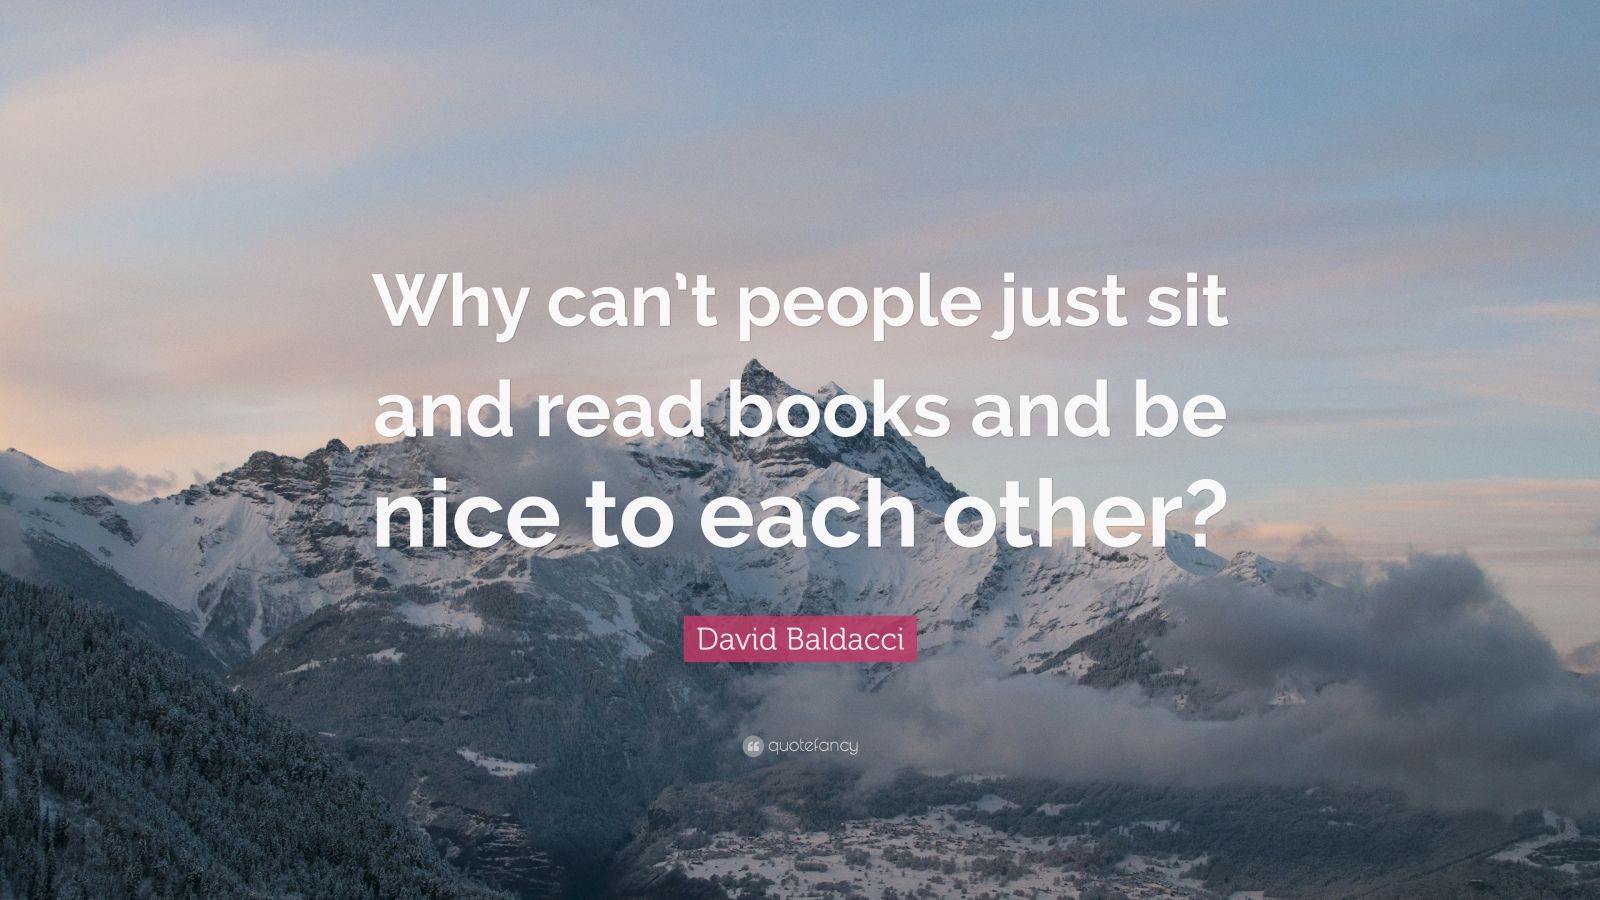 David Baldacci Quote: “Why can’t people just sit and read books and be ...